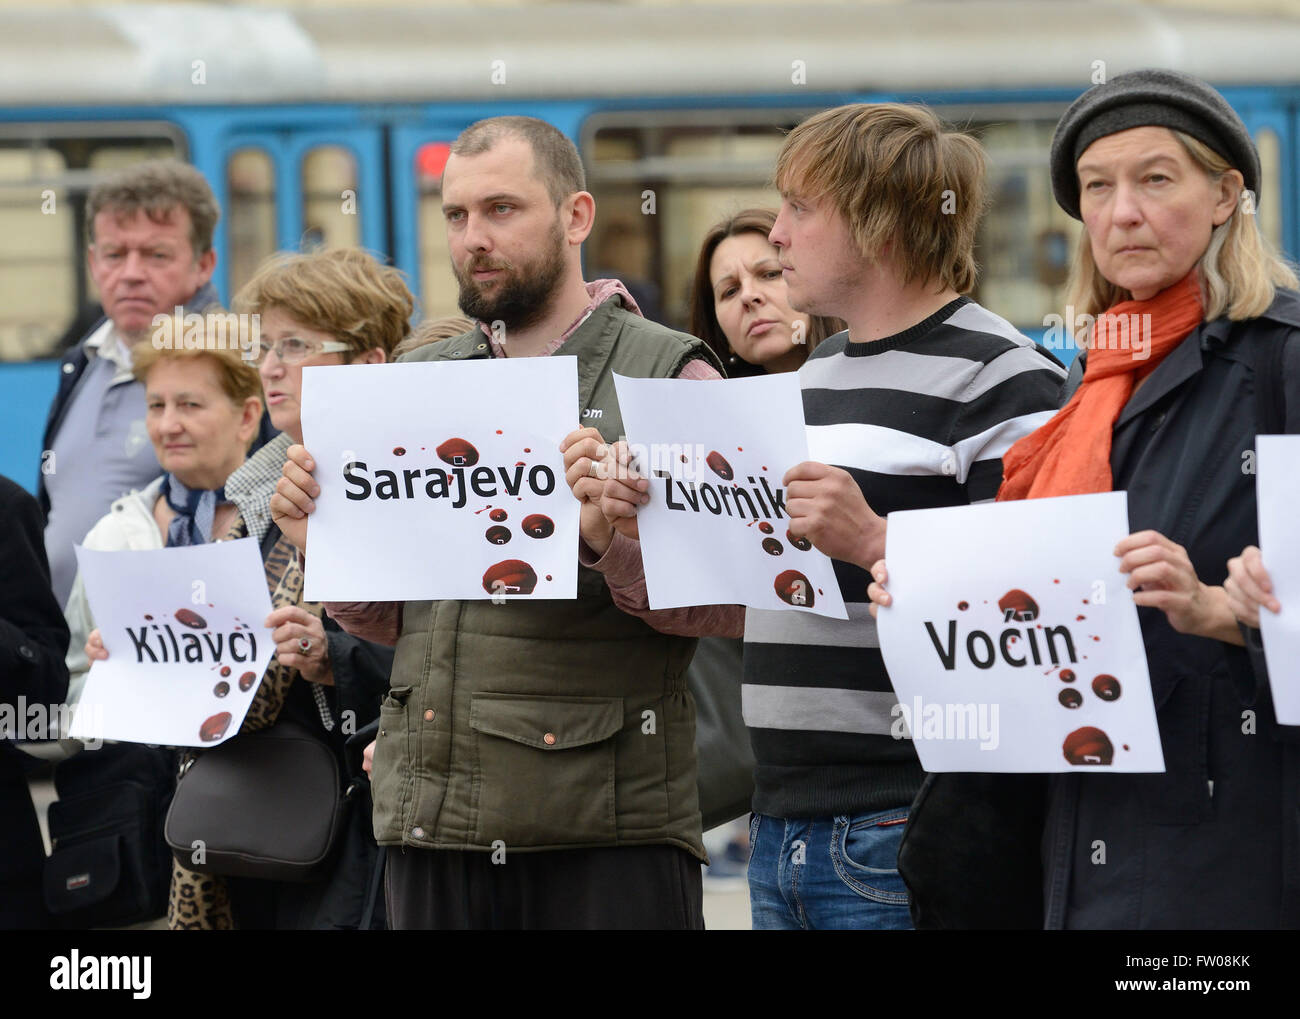 Zagreb, Croatia. 31st Mar, 2016. Croatian peace activists stage a protest against the acquittal of Serbian Radical Party leader Vojislav Seselj for war crimes at Ban Jelacic square in Zagreb, capital of Croatia, March 31, 2016.International Criminal Tribunal of the Former Yugoslavia (ICTY) ruled that Serbian Radical Party leader Vojislav Seselj was not guilty of all counts of crimes against humanity and war crimes on Thursday. © Miso Lisanin/Xinhua/Alamy Live News Stock Photo